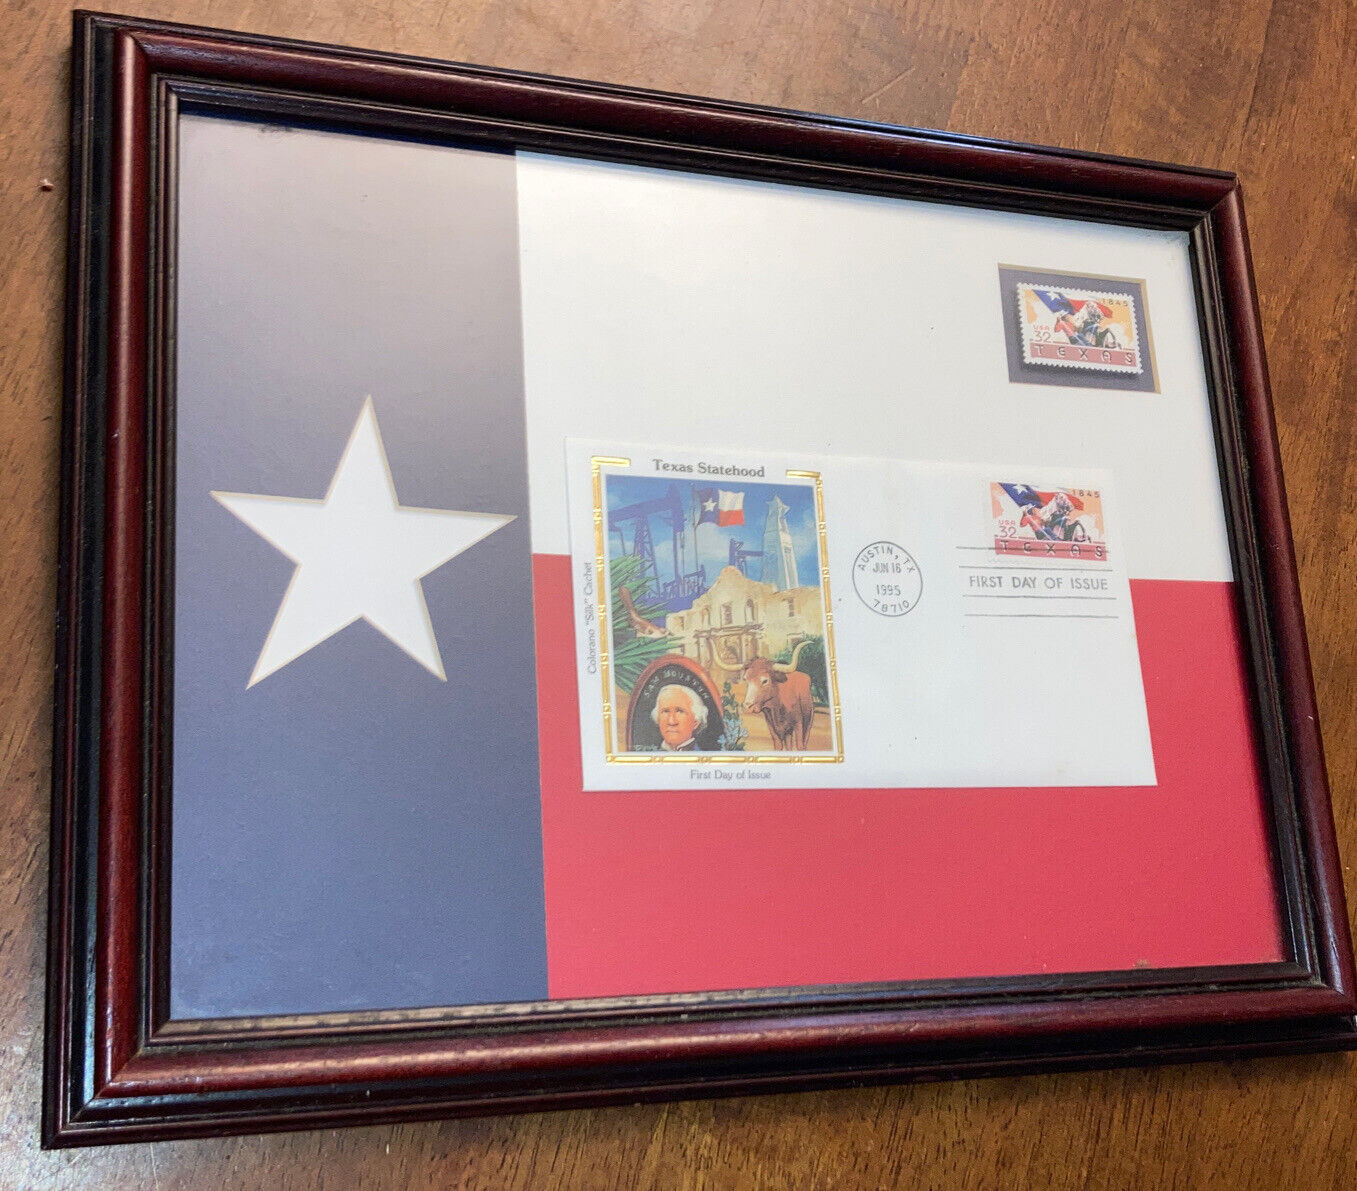 Texas Statehood & First Day Cover Framed Issued USA 32 cents ALAMO Sam Houston